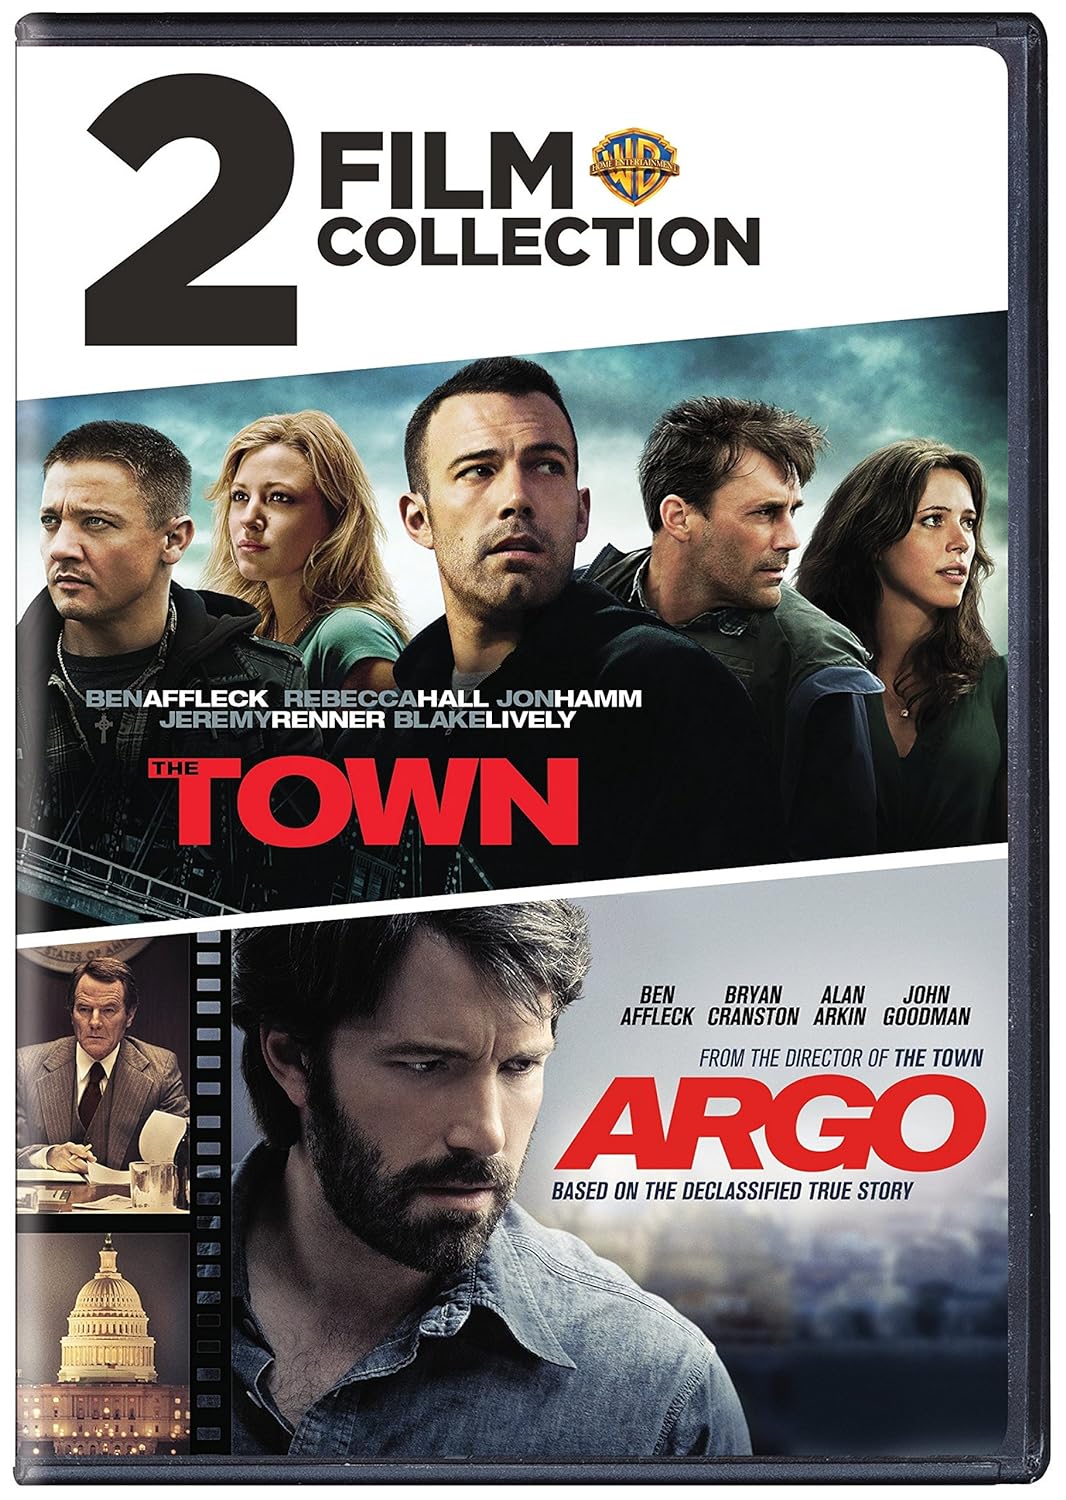 Argo / The Town: 2 Film Collection [DVD]